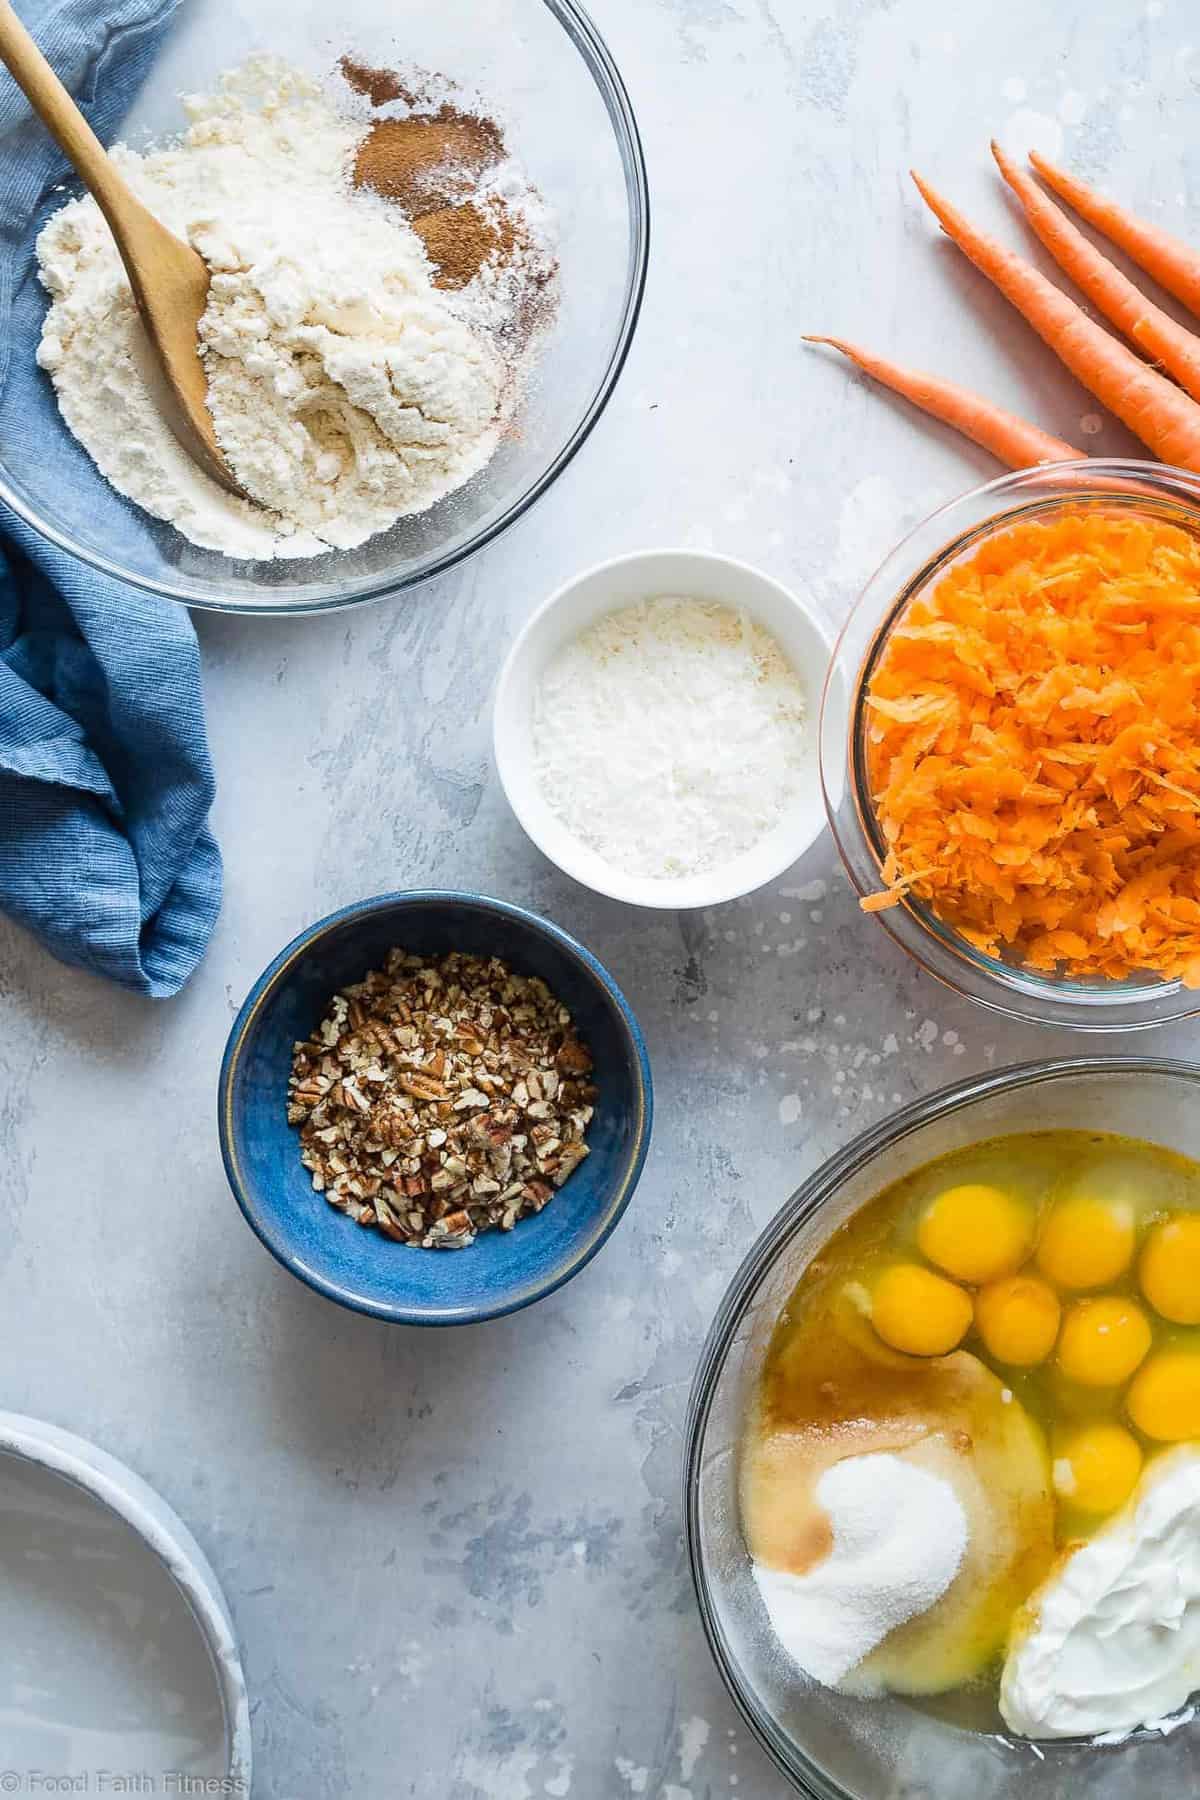 Healthy Gluten Free Sugar Free Carrot Cake - this healthy, sugar free carrot cake is SO moist and tender, you'll never know it's gluten, oil and butter free, made with Greek yogurt, only 170 calories and 5 WW Freestyle points! Perfect for Easter! | #Foodfaithfitness | #Lowcarb #sugarfree #glutenfree #carrotcake #easter